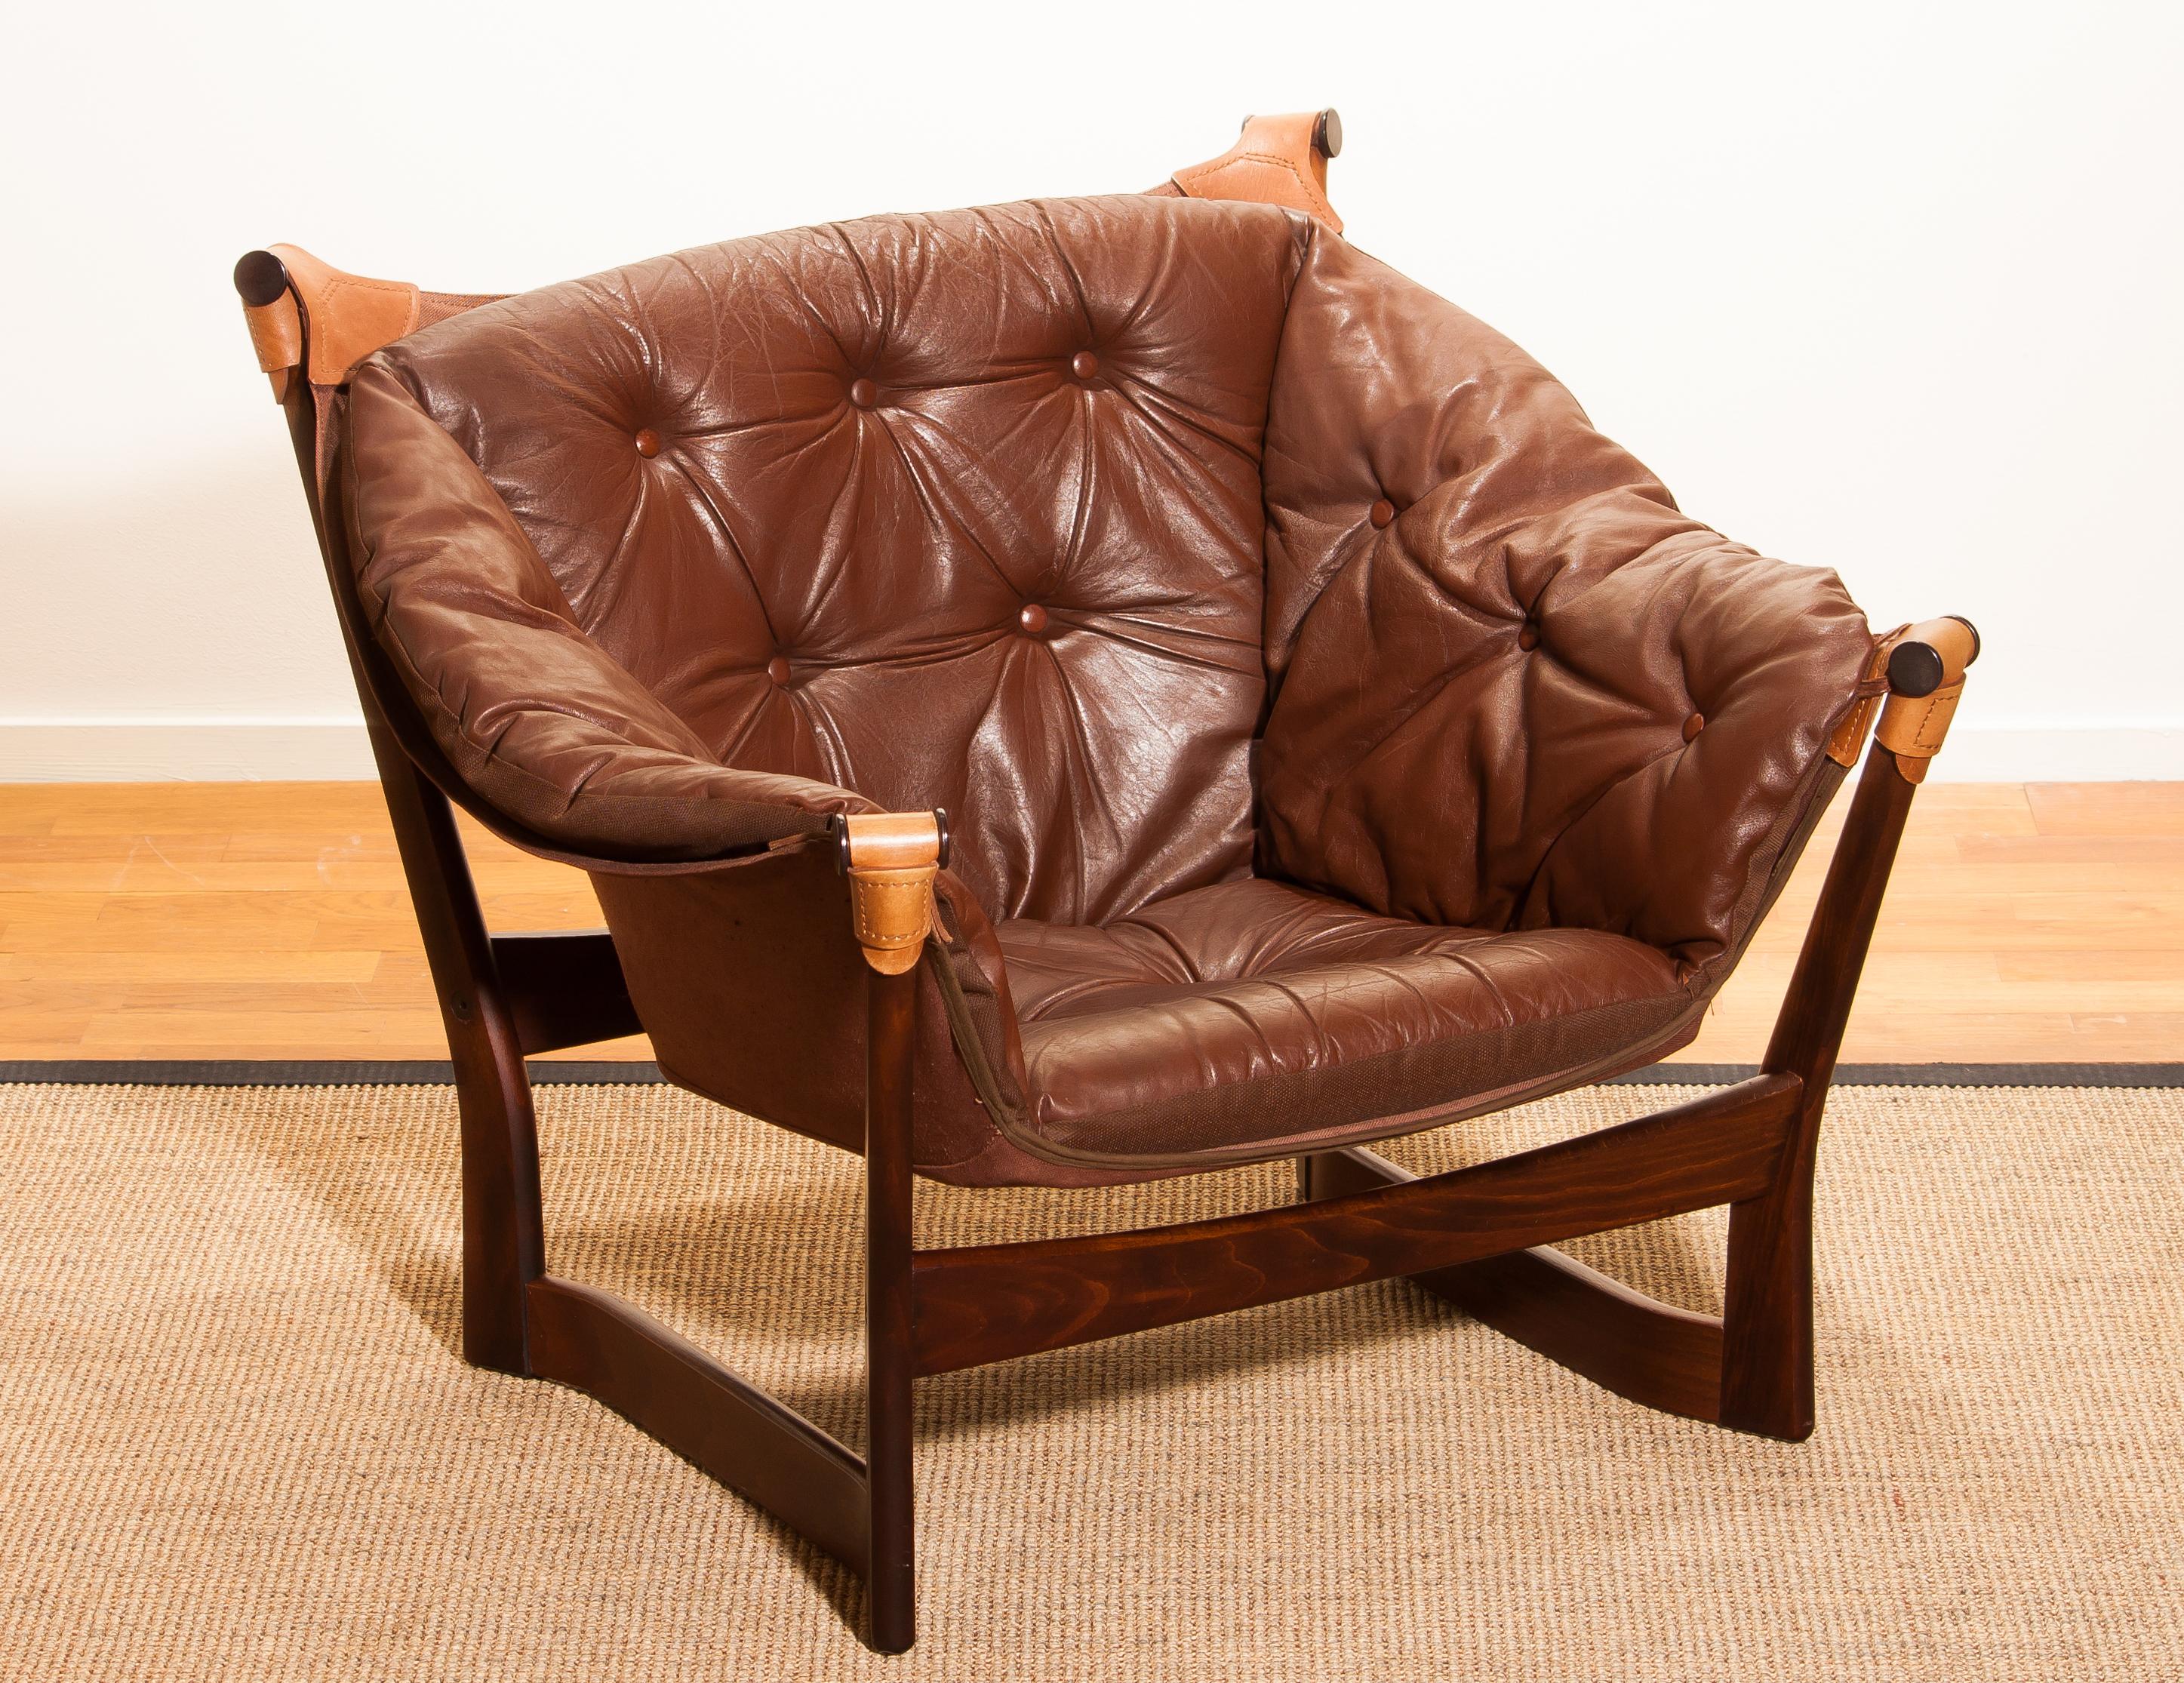 Mid-20th Century 1950s, Teak and Leather 'Trega' Lounge Chair by Tormod Alnaes for Sørliemøbler